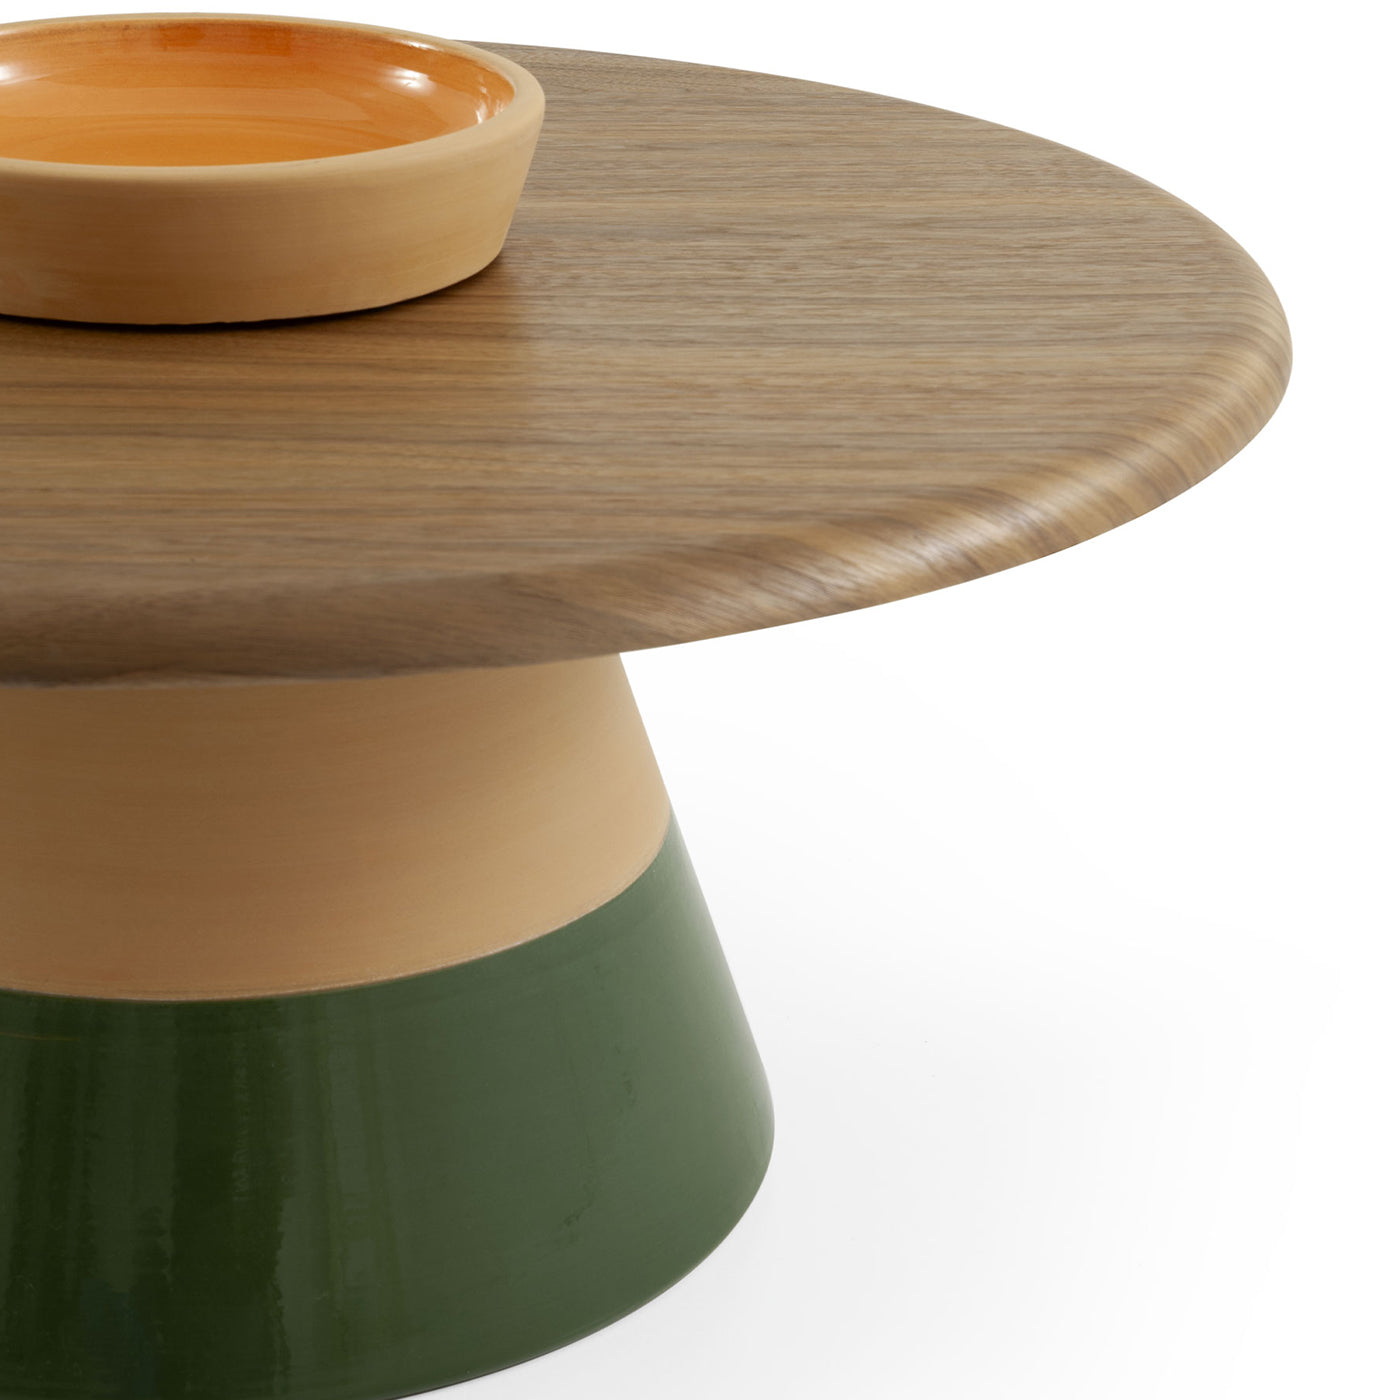 Sablier Small Table with Clay Base & Canaletto Veneer Wood Top - Alternative view 3